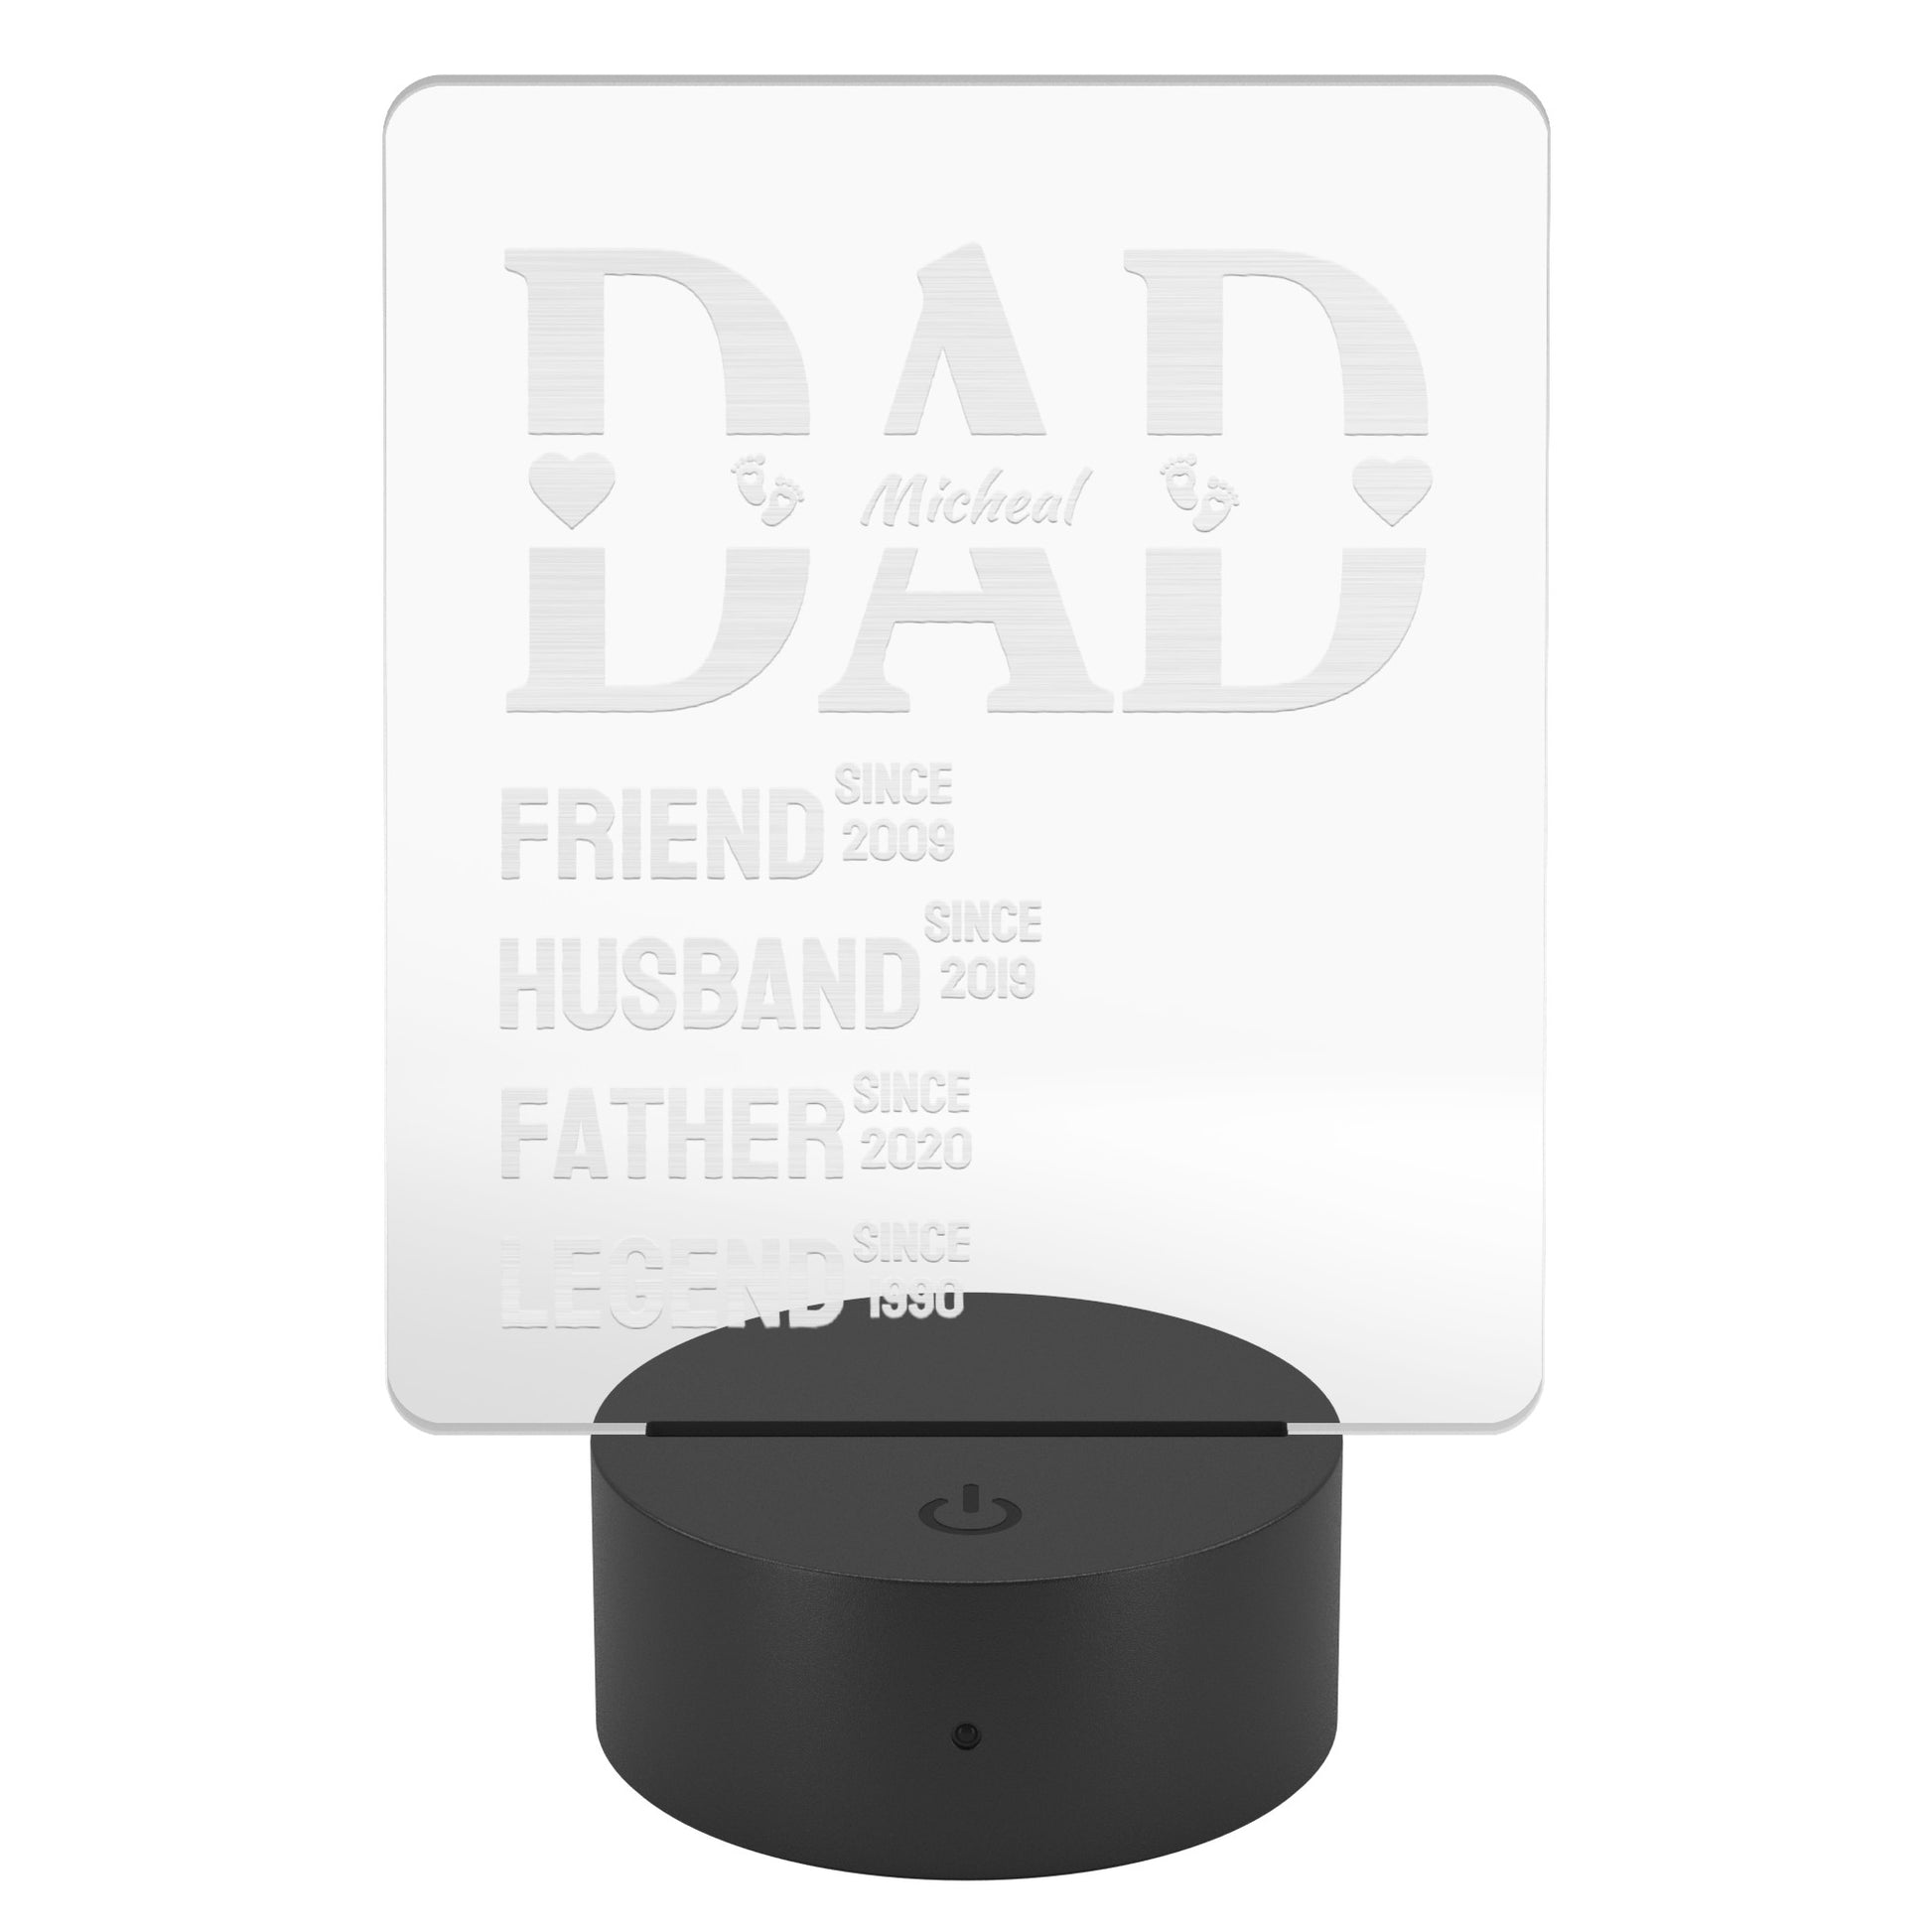 Personalized LED Signs - Dad's Legacy Glow Personalized LED Lamp 